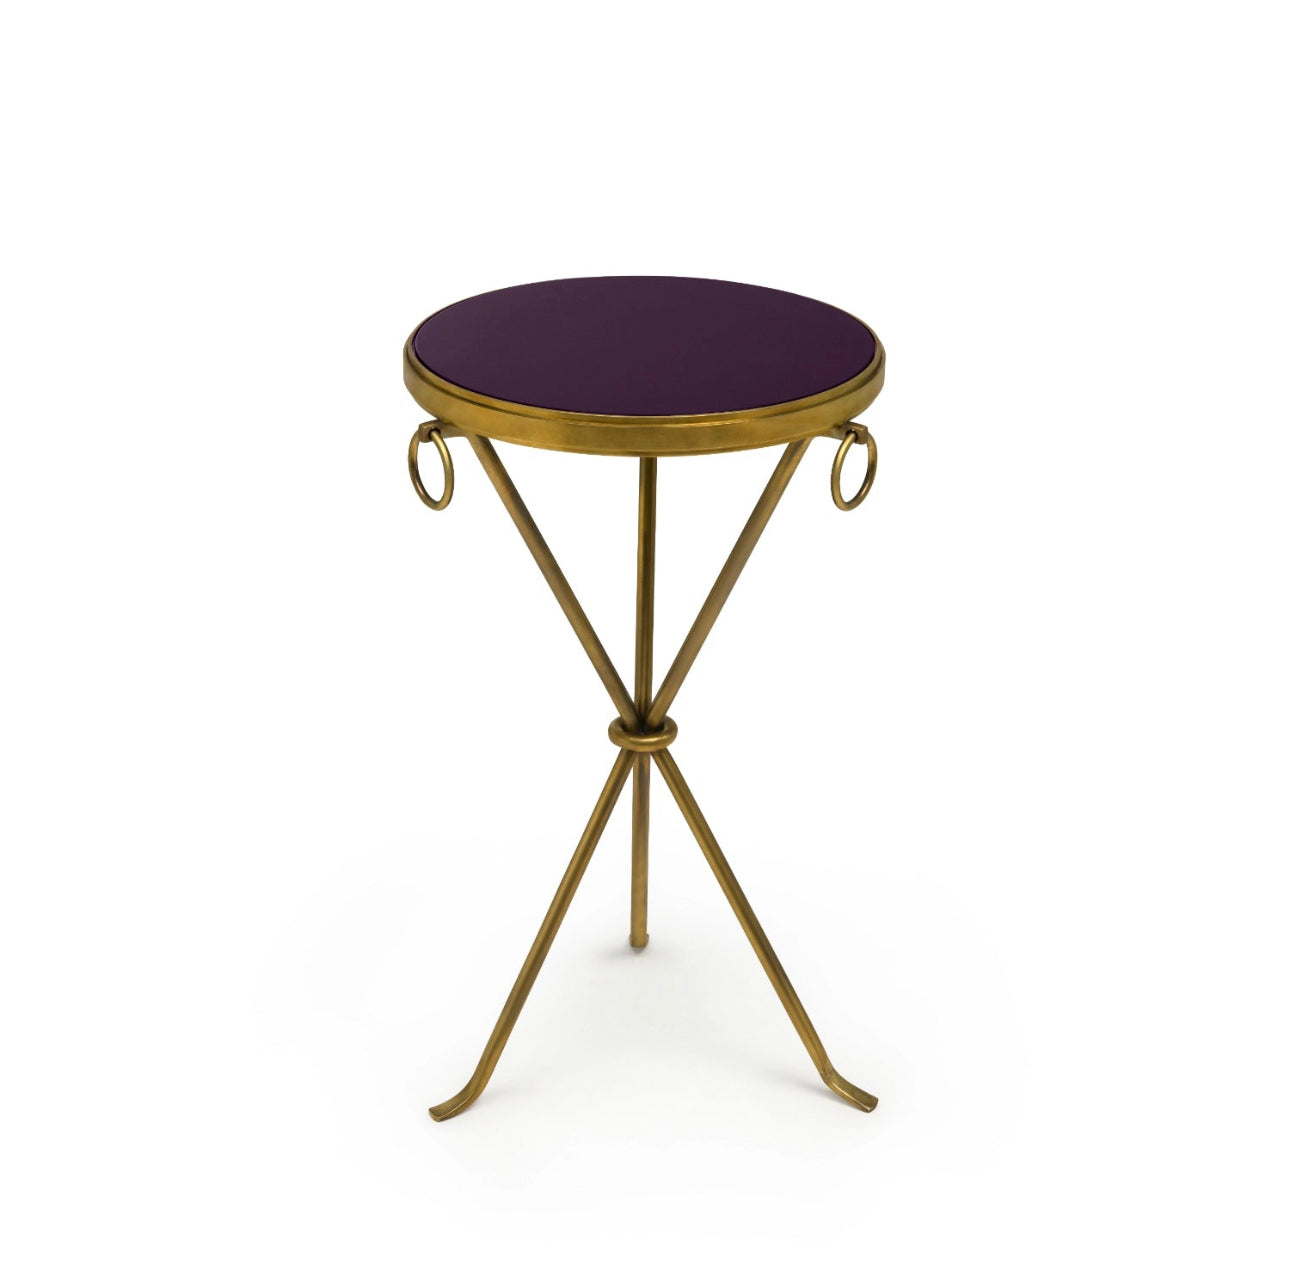 Lacquer Drinks Table - Aubergine